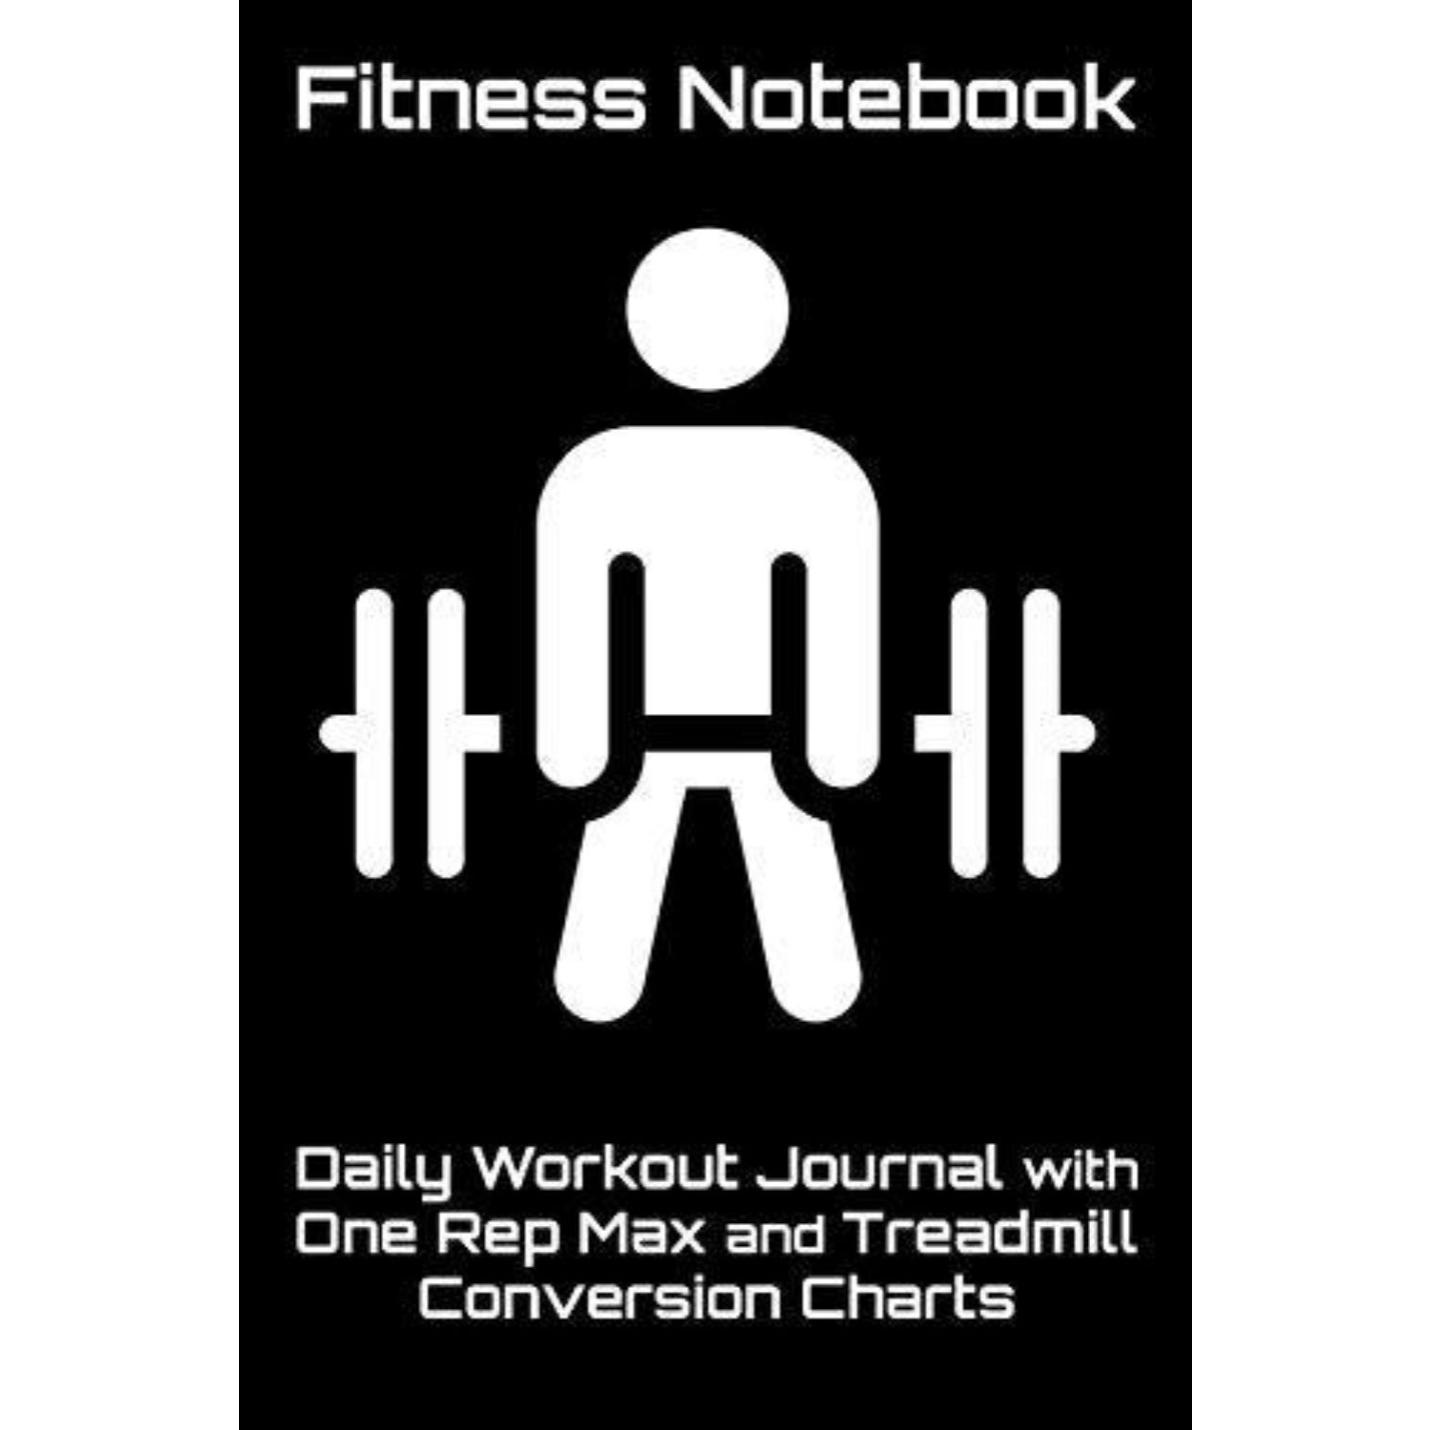 Fitness Notebook - Daily Workout Journal with Conversion Charts - Black Cover